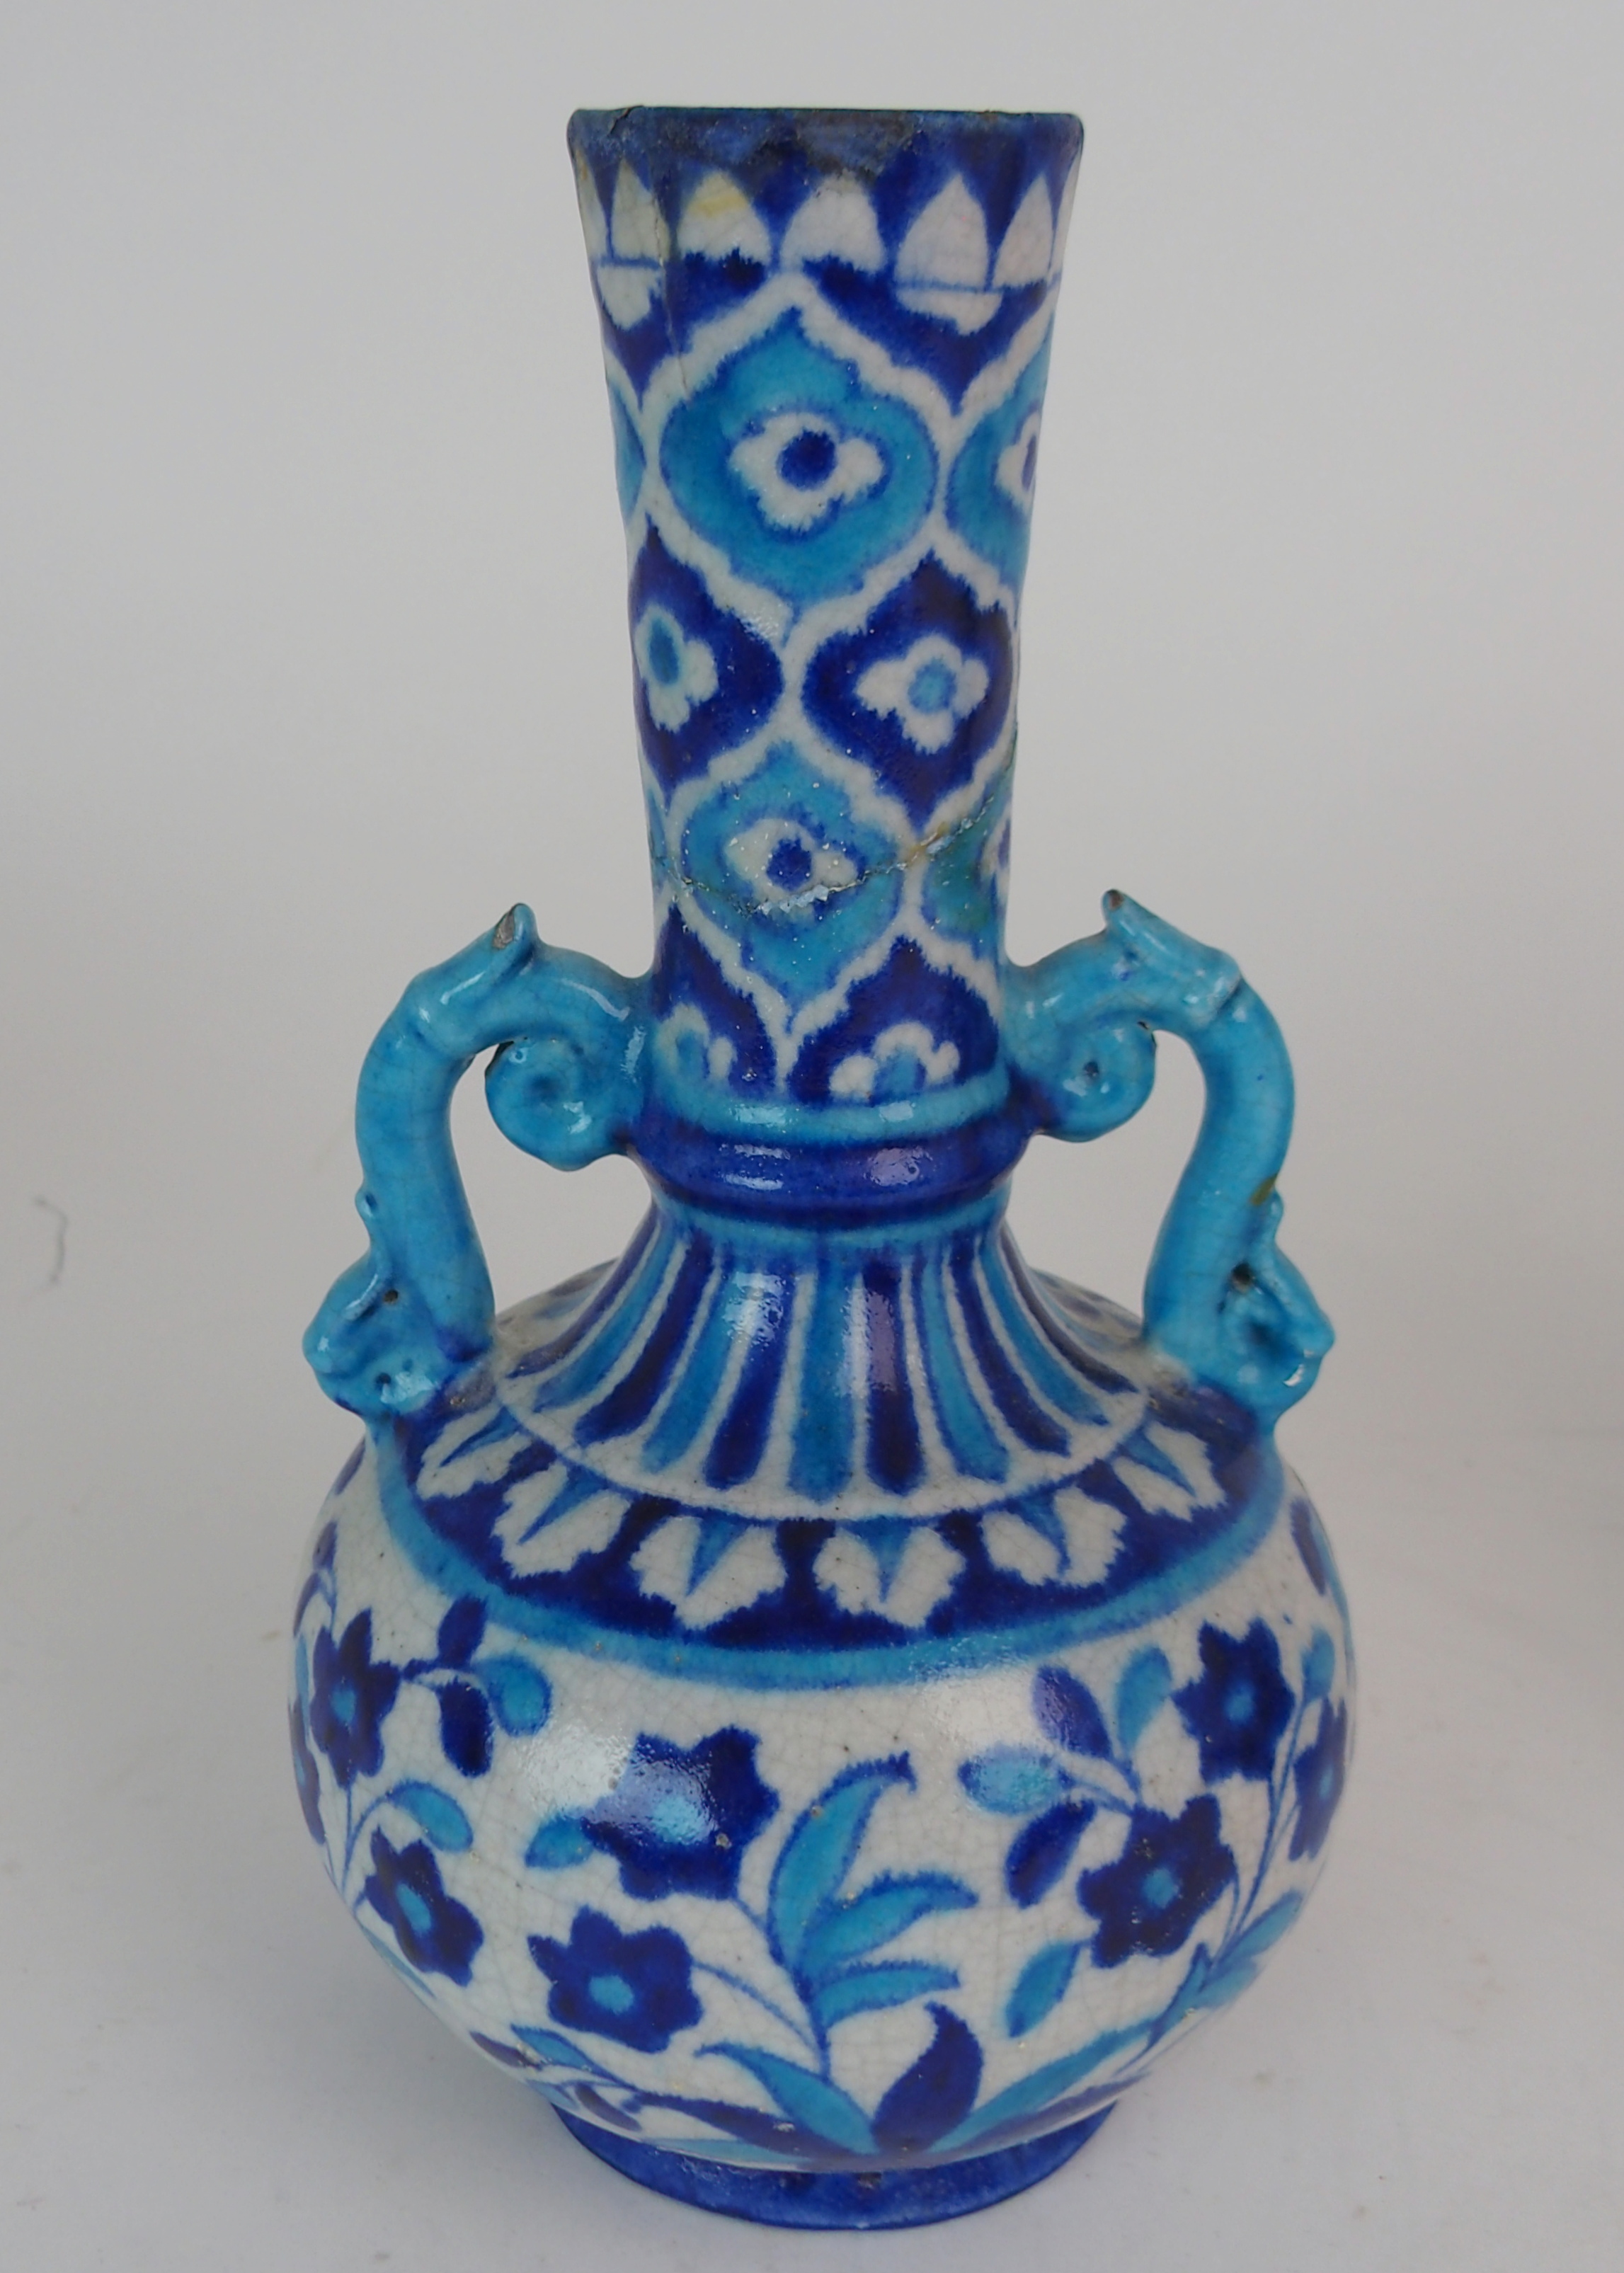 A PAIR OF PERSIAN POTTERY BLUE AND WHITE TWO HANDLED VASES painted with flowers and foliage, with - Image 3 of 11